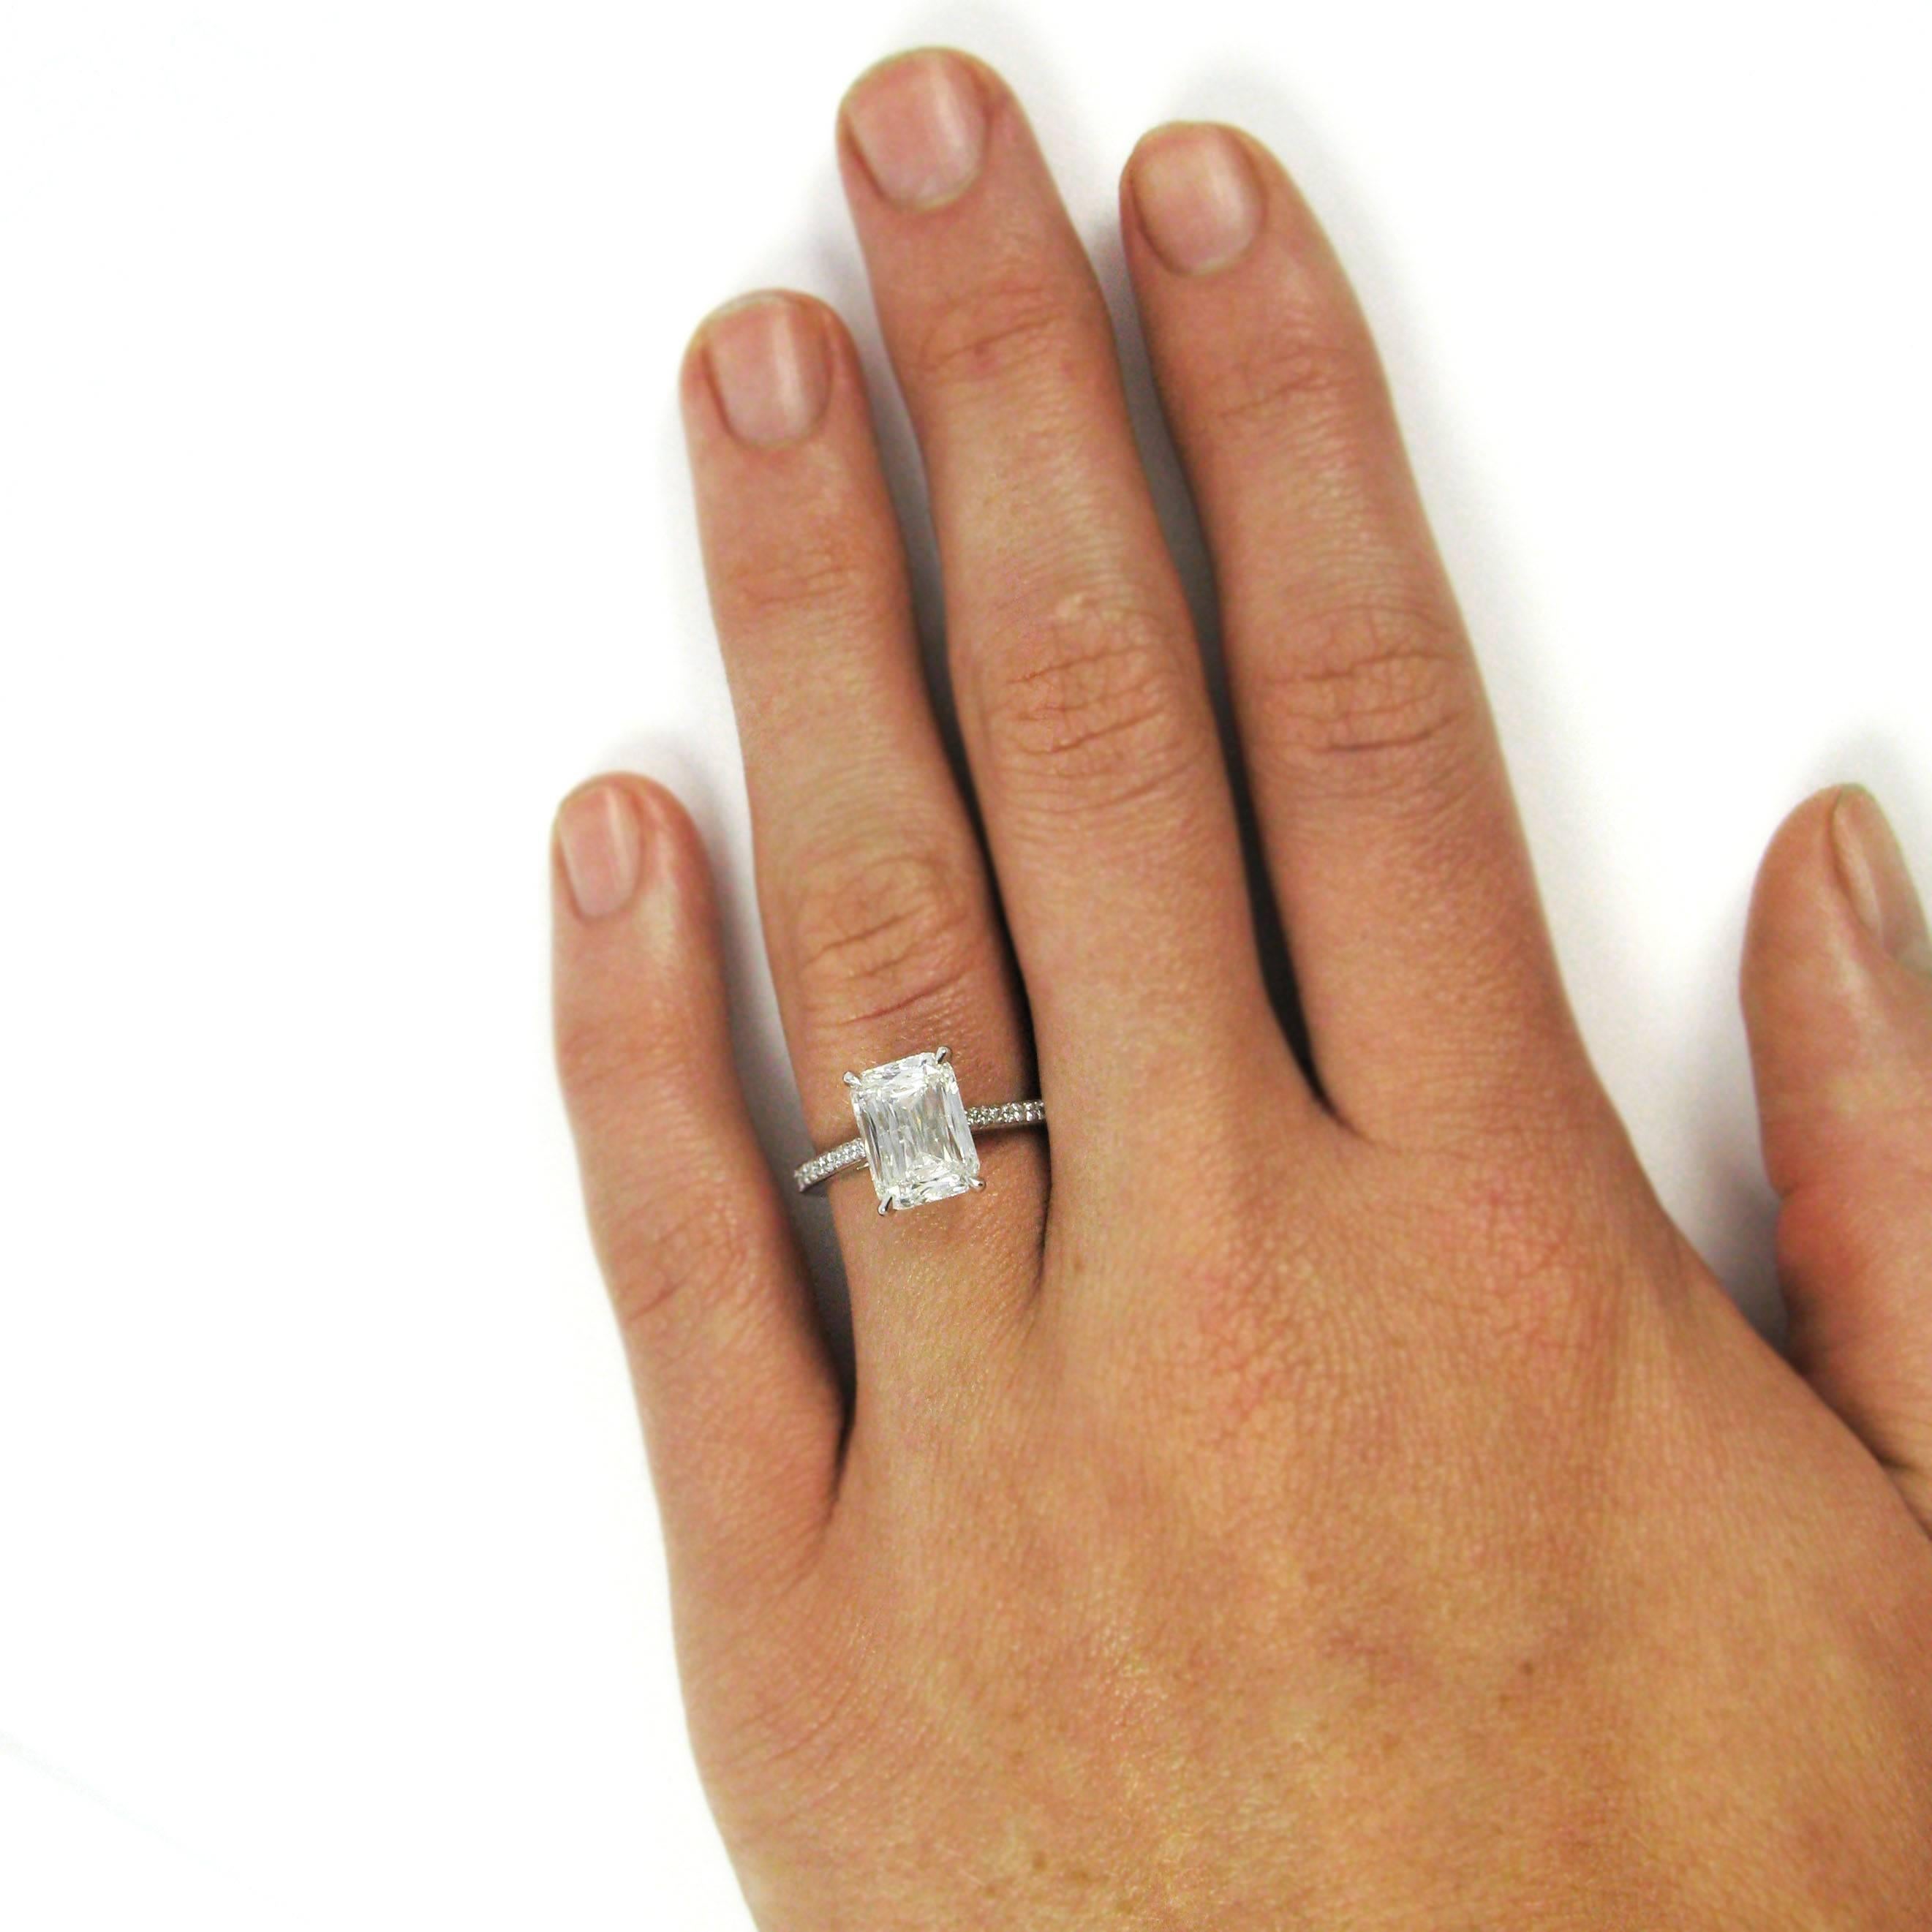 A modern and unusual sparkler! This ring features a 3.27 carat 